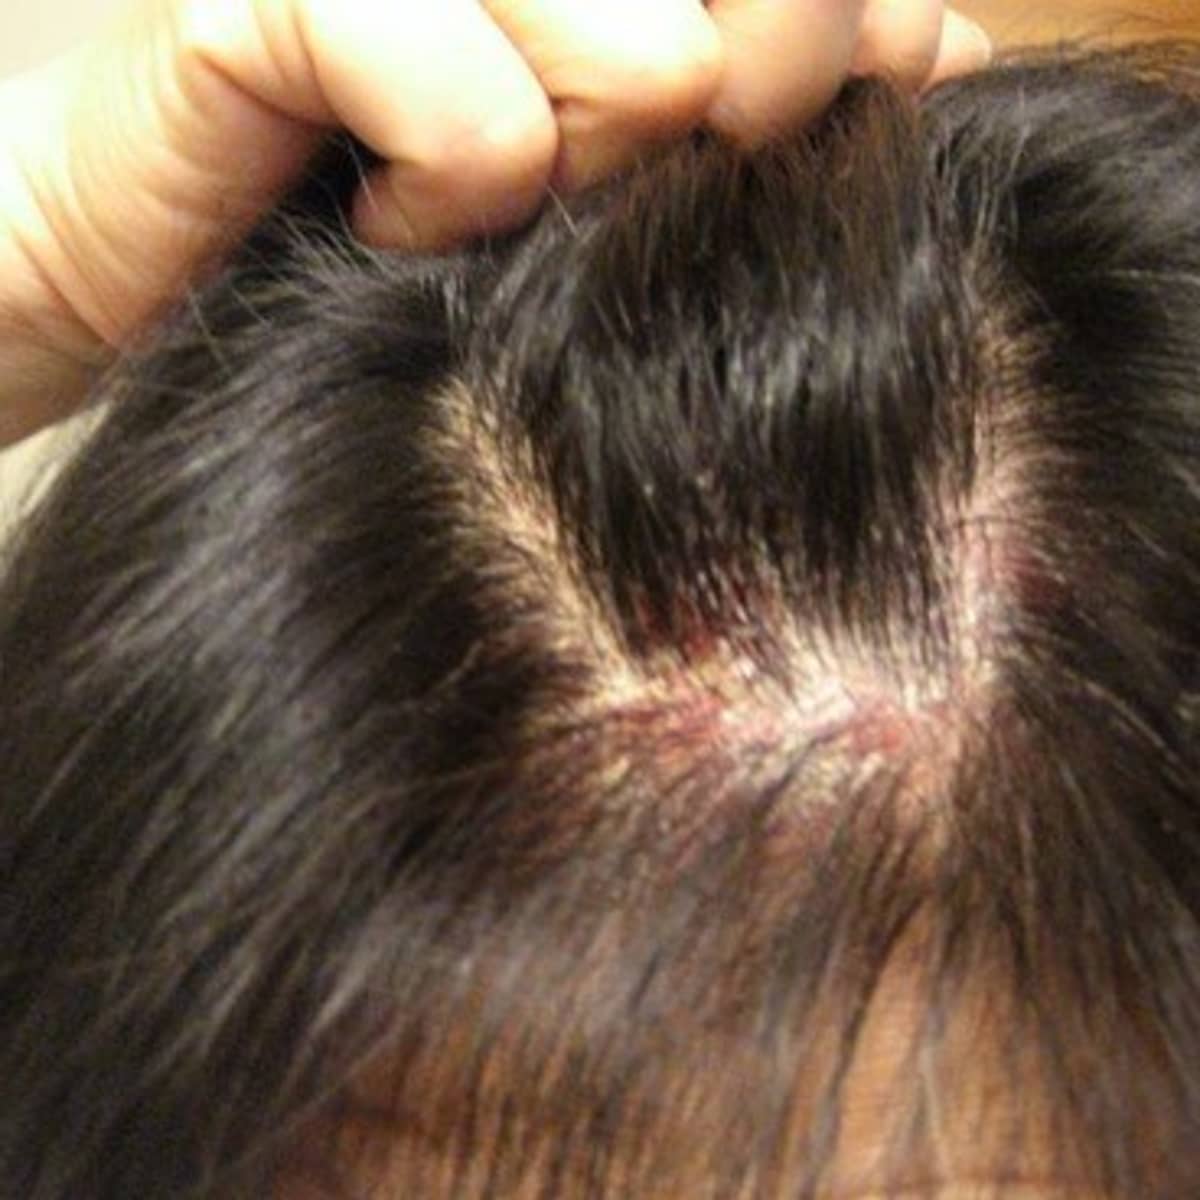 Itchy Scalp - Symptoms, Hair loss, Causes, Treatment - HubPages